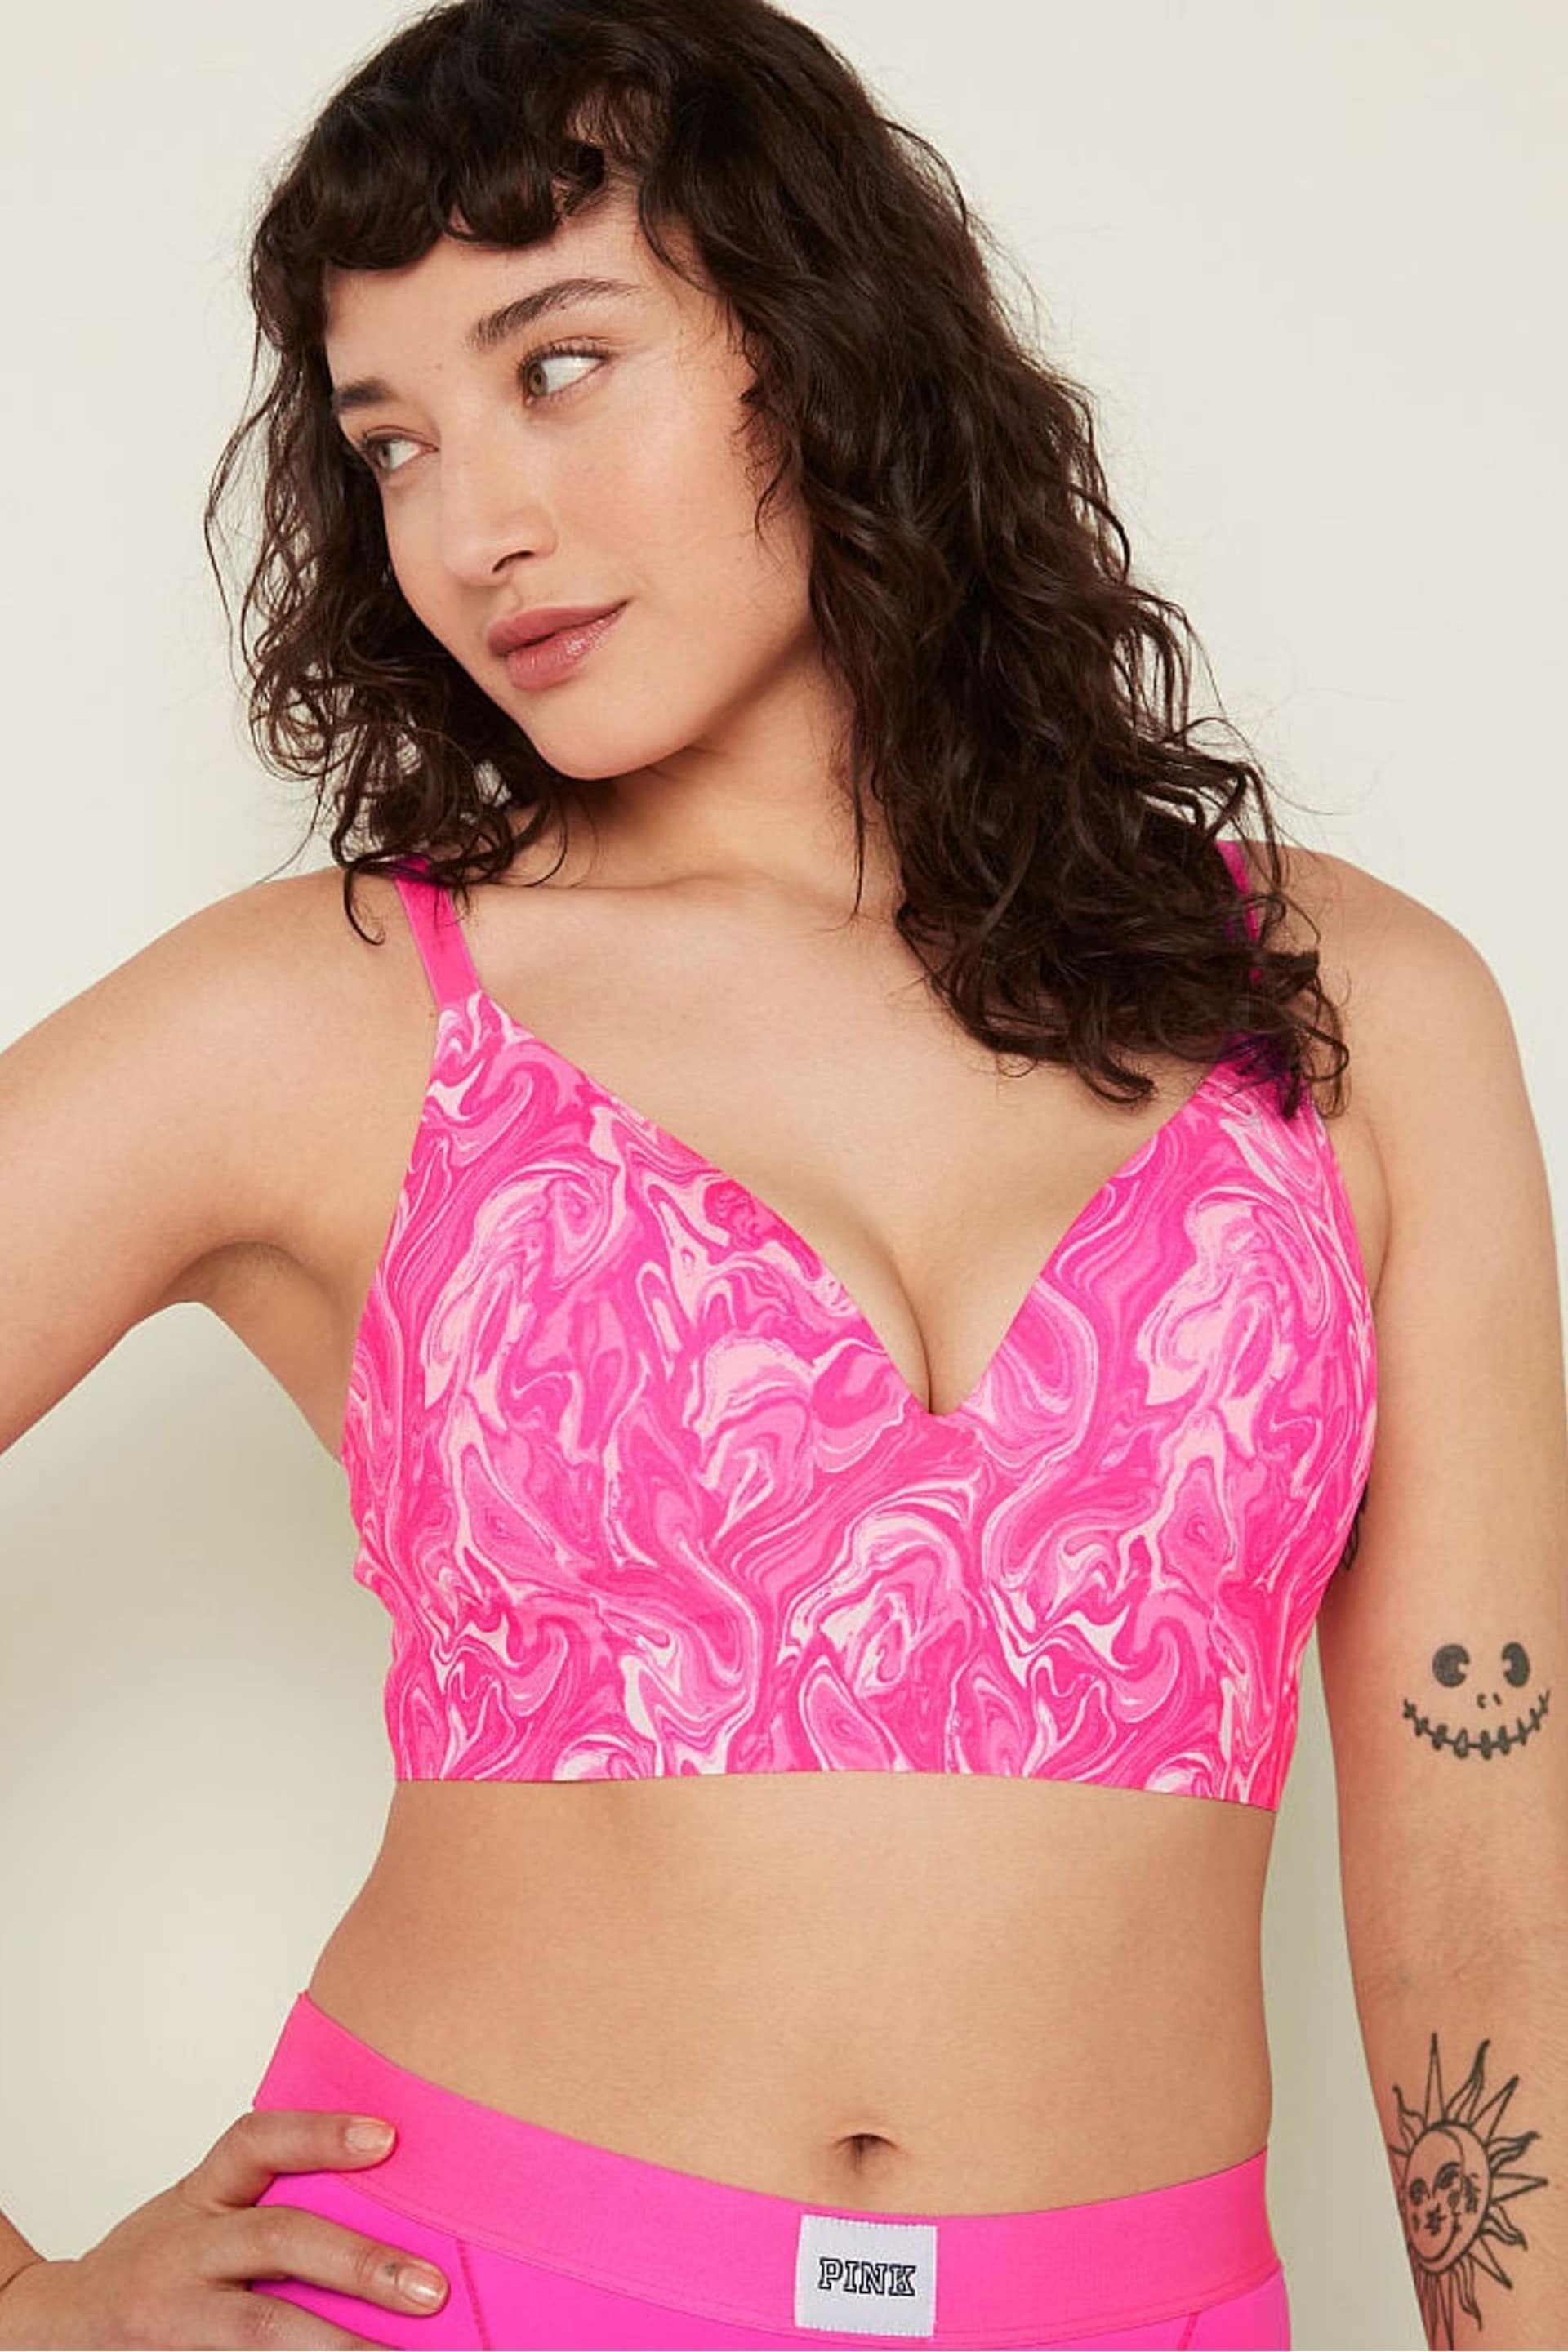 Victoria's Secret PINK Atomic Pink Marble Smooth Non Wired Push Up Bralette - Image 1 of 4